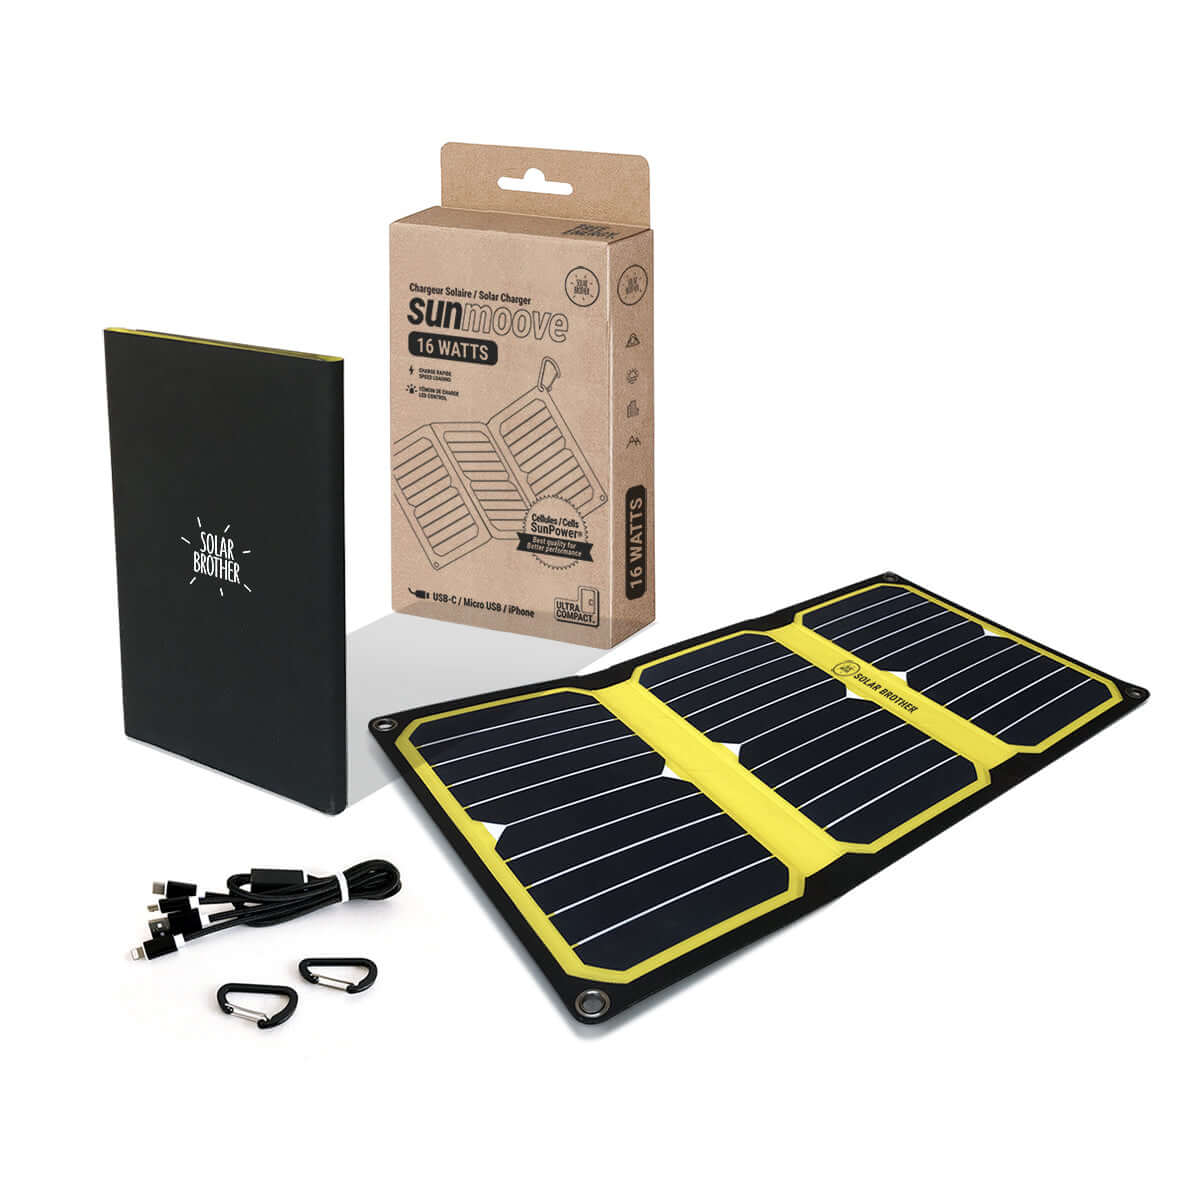 Chargeur solaire SUNMOOVE® 16 Watts